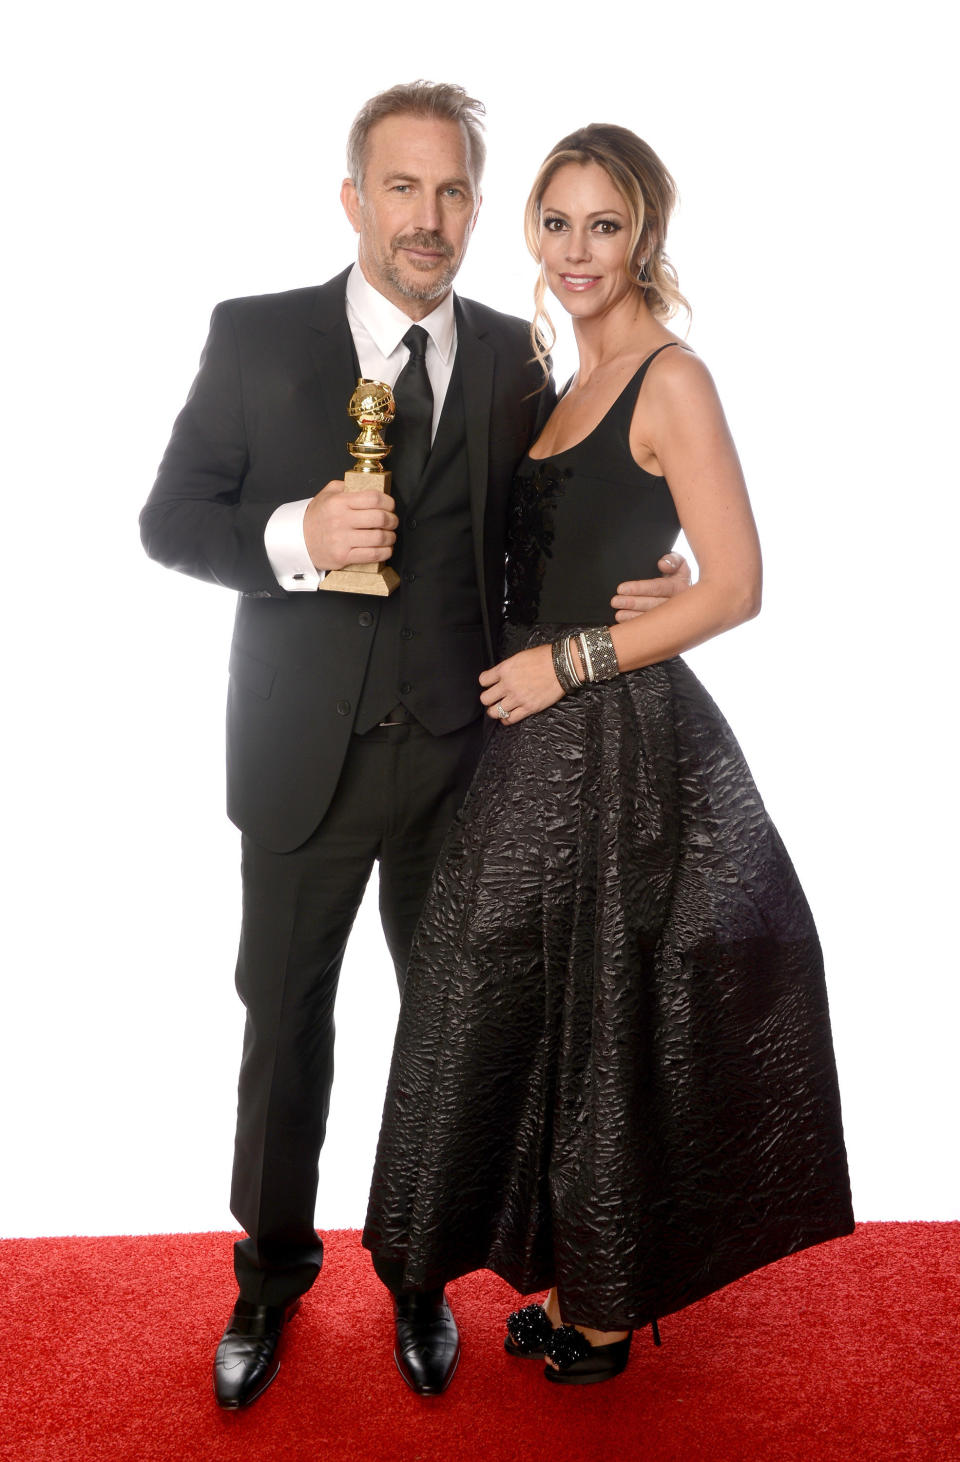 BEVERLY HILLS, CA - JANUARY 13:  Actor Kevin Costner, winner of Best Actor in a Mini-Series or a Motion Picture Made for Television for 'Hatfields & McCoys', and wife Christine Baumgartner pose for a portrait at the 70th Annual Golden Globe Awards held at The Beverly Hilton Hotel on January 13, 2013 in Beverly Hills, California.  (Photo by Dimitrios Kambouris/Getty Images)